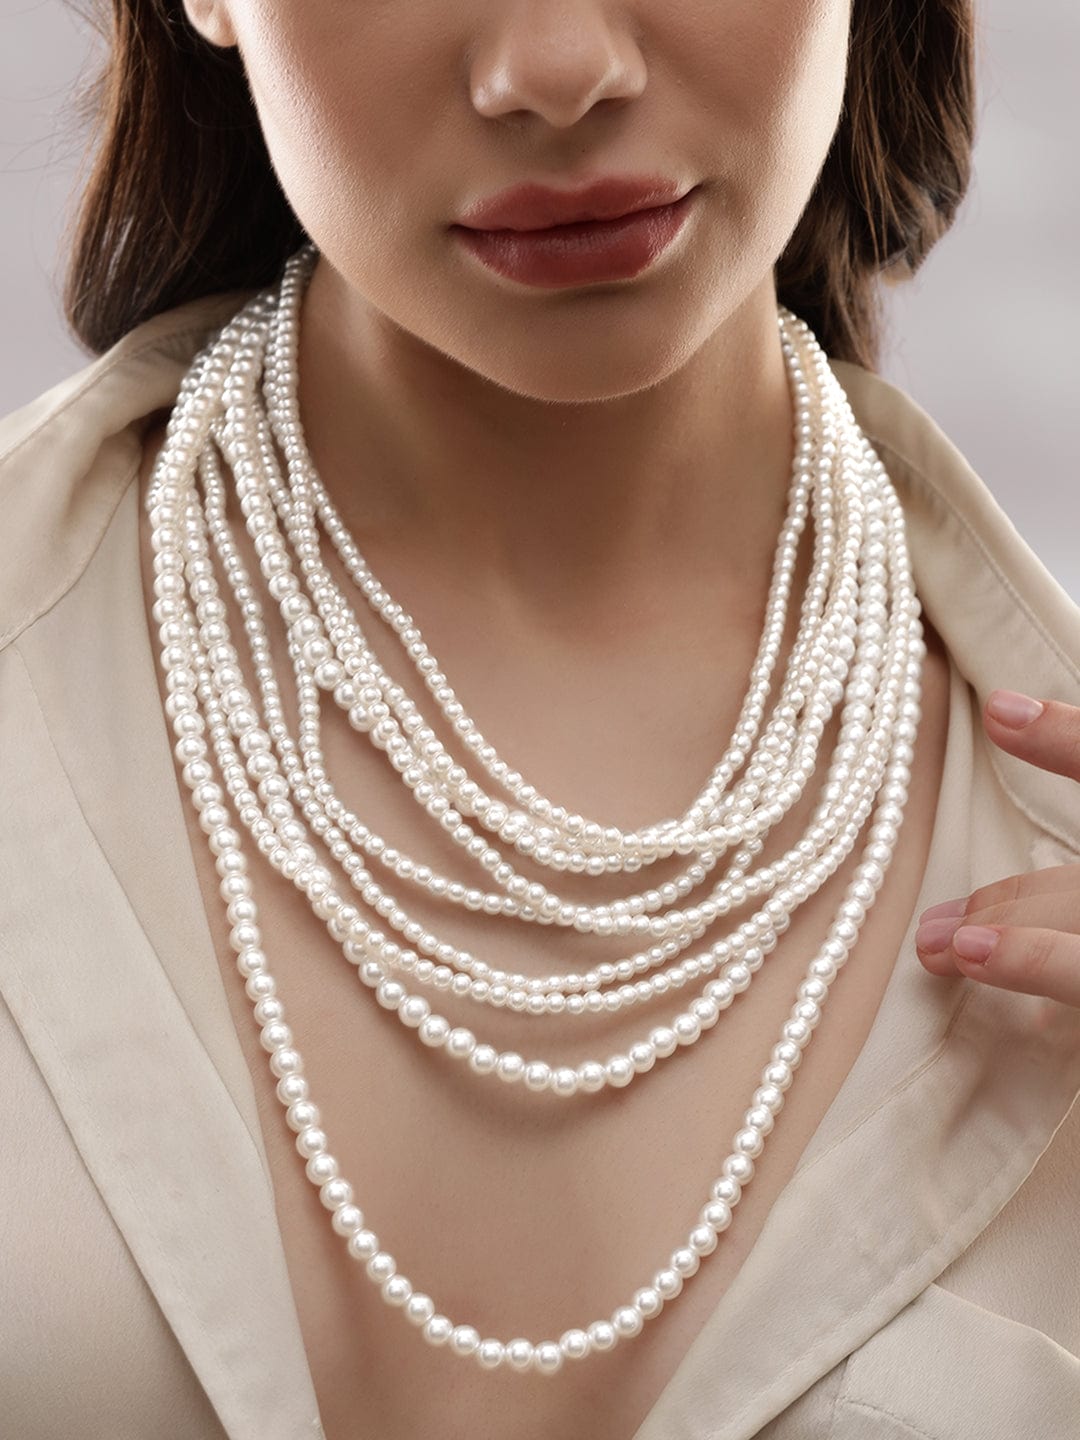 Rubans Cream Pearl Beaded Multilayer Statement Layer Necklace Necklaces, Chains & necklace